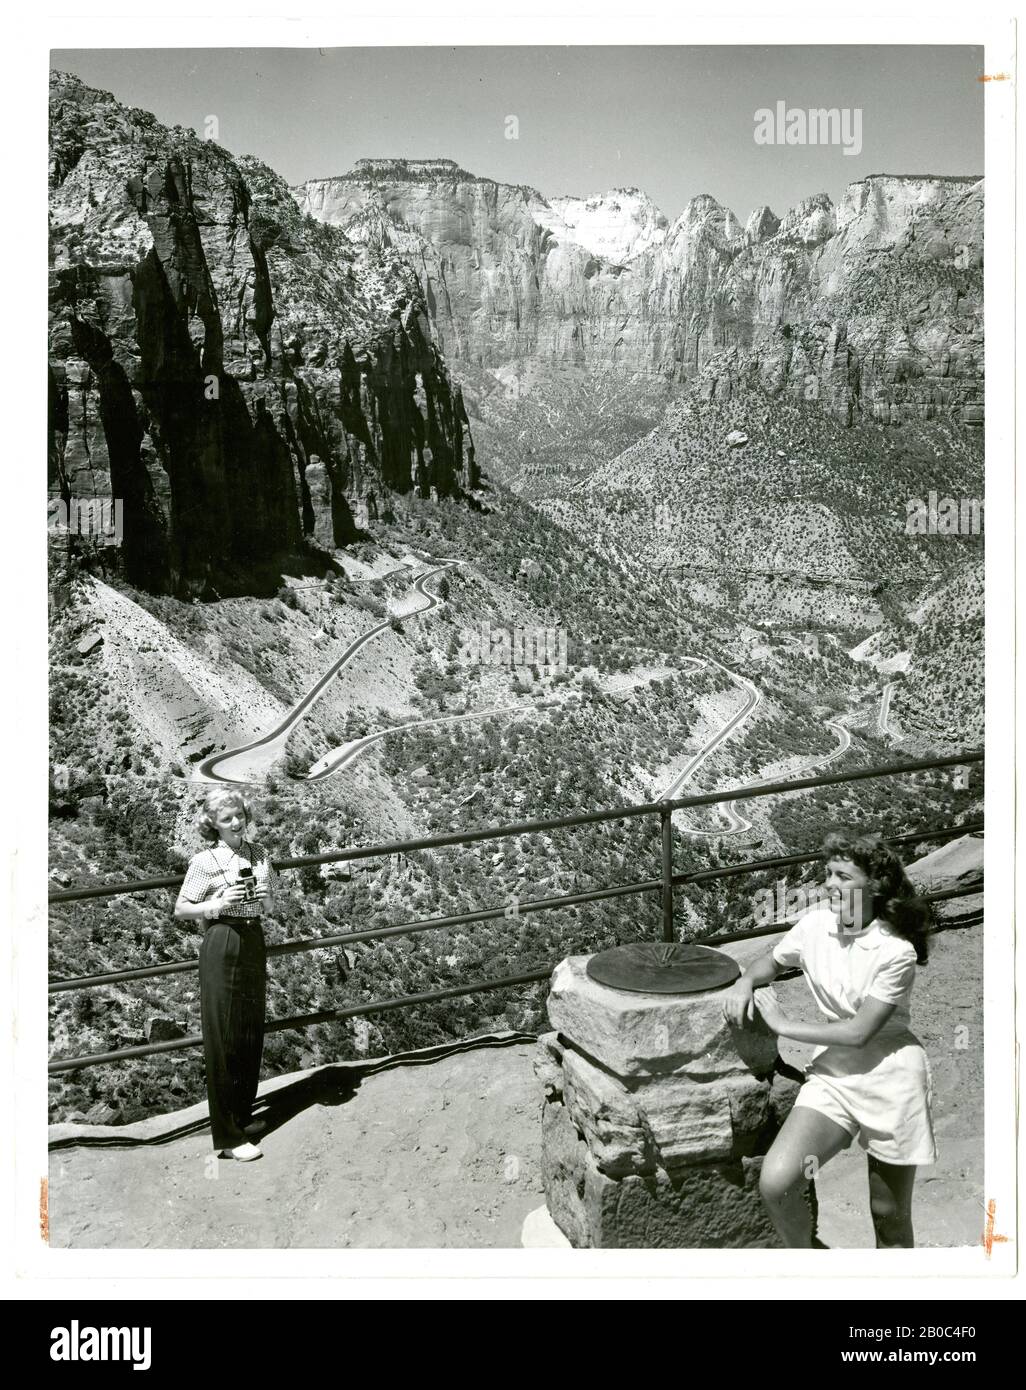 Union Pacific Railroad Photographer, Zion-Mount Carmel Highway, Zion National Park, Utah, 5/8/1949, stampa in argento gelatina, 9 7/8x 7 1/2 in. (25,08 x 19,05 cm Foto Stock